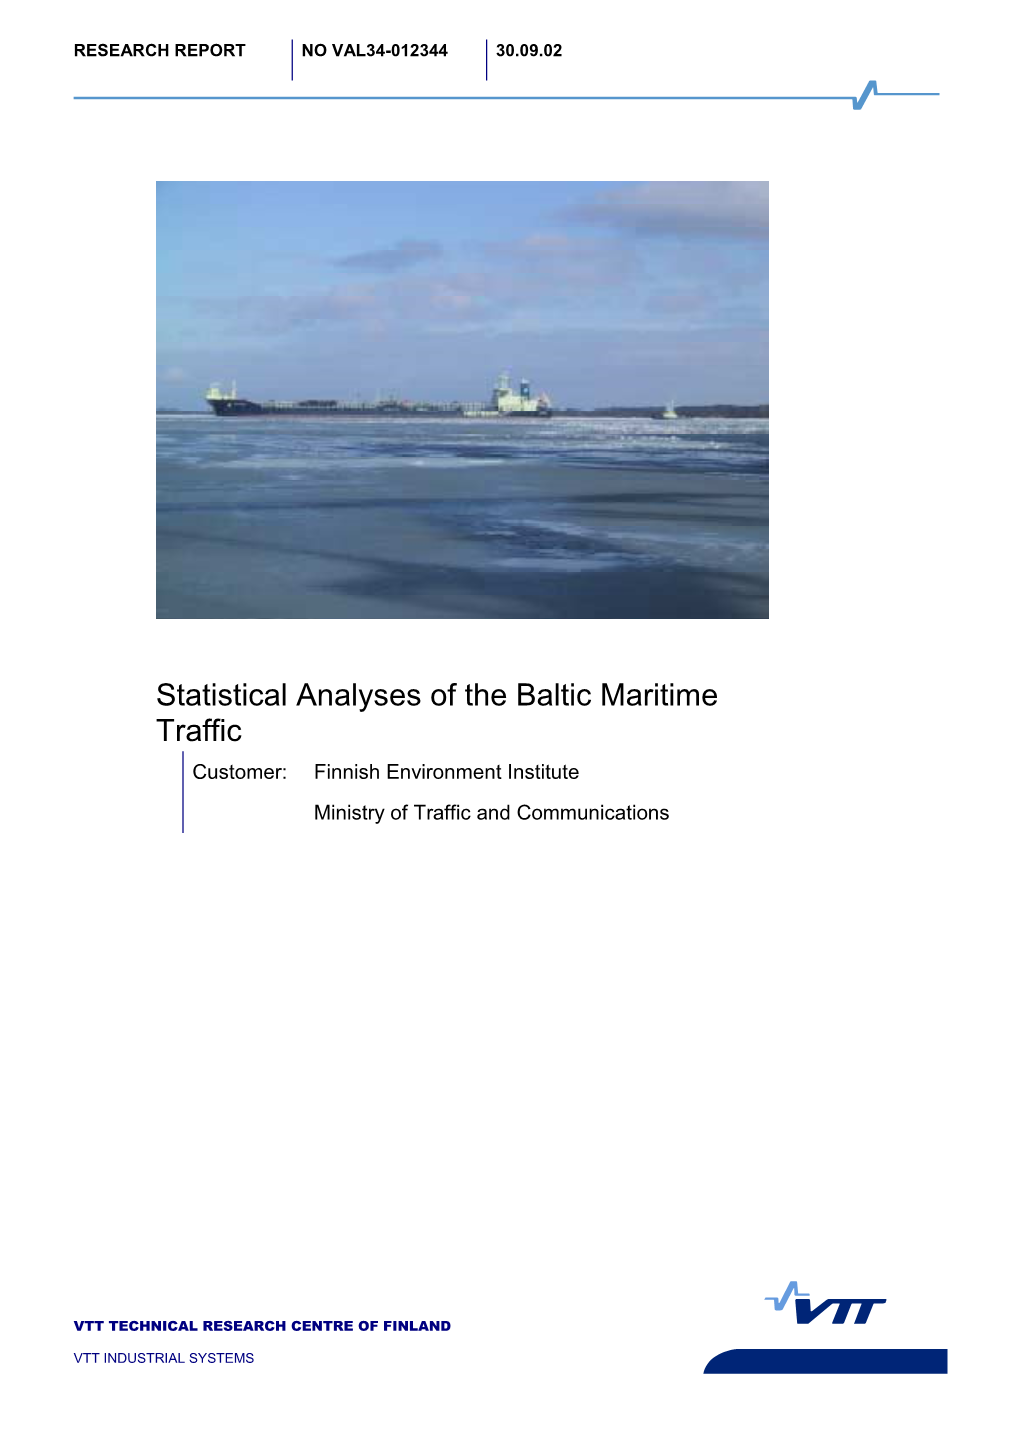 Statistical Analysis of the Baltic Maritime Traffic